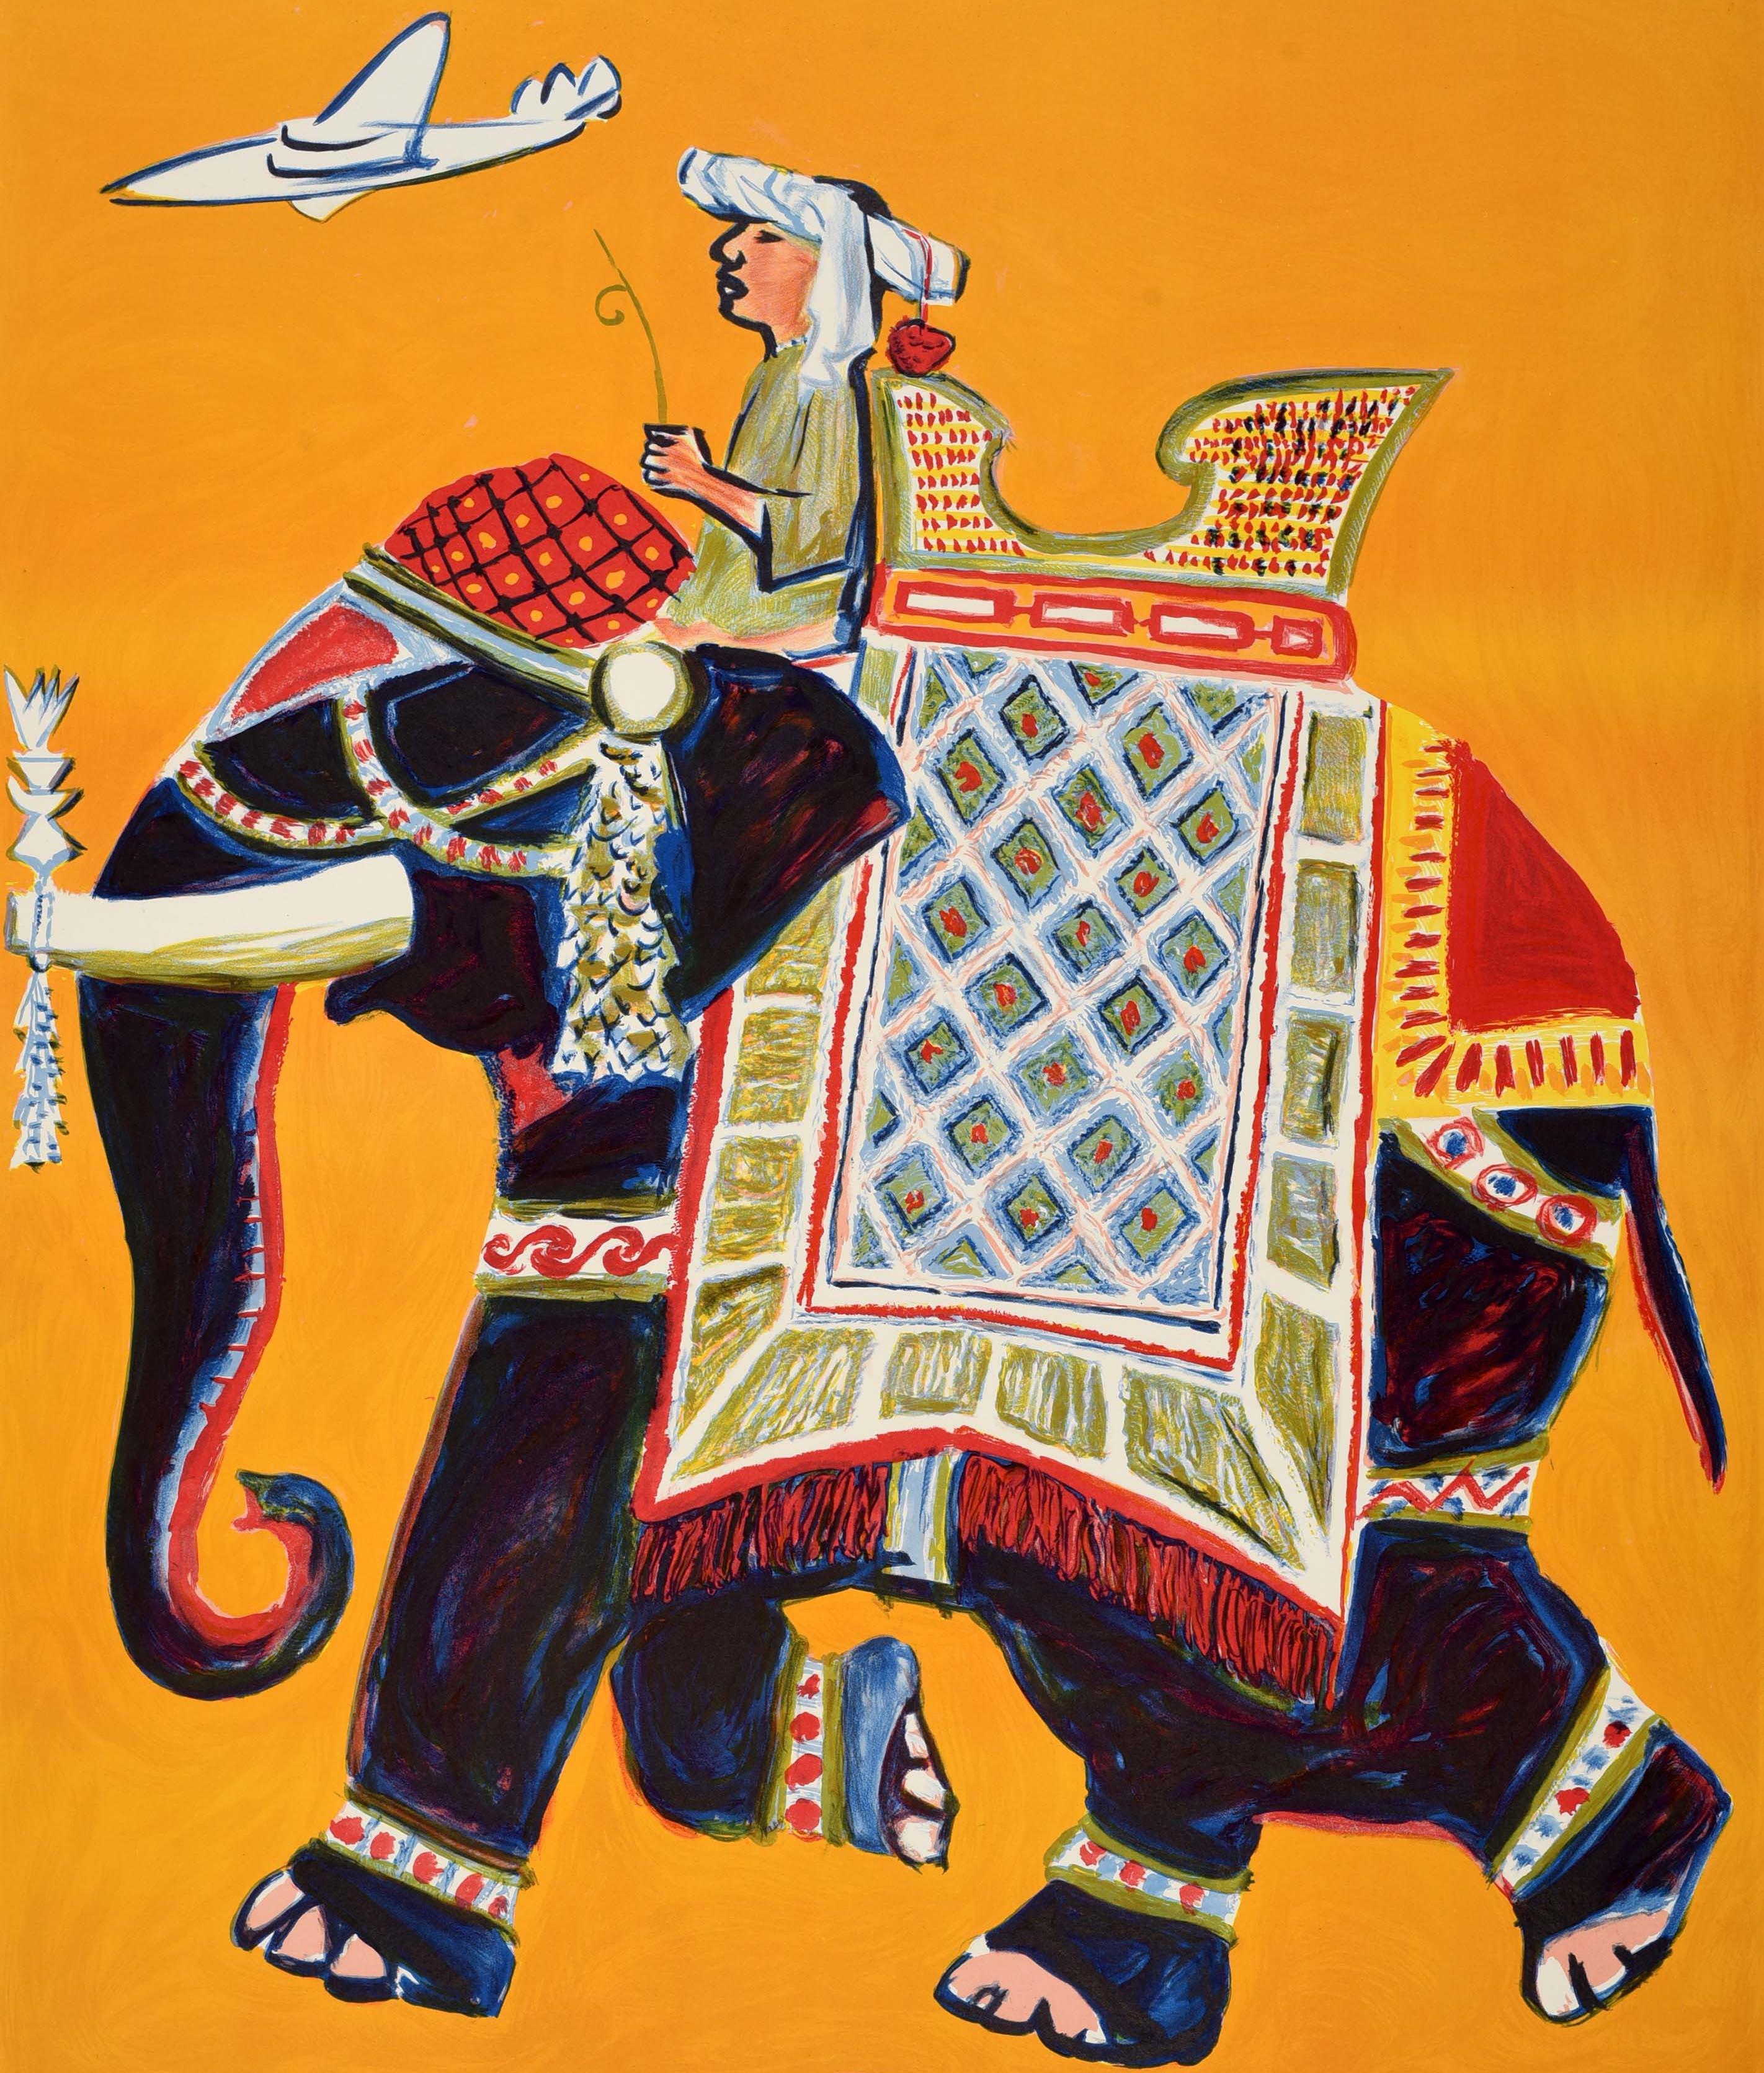 Original vintage Asia travel poster issued by Air Ceylon - Fly the Sapphire Service to Ceylon - featuring artwork by Mart Kempers (1924-1993) of a man riding an elephant decorated in colourful fabric with a seat on its back on a yellow background, a